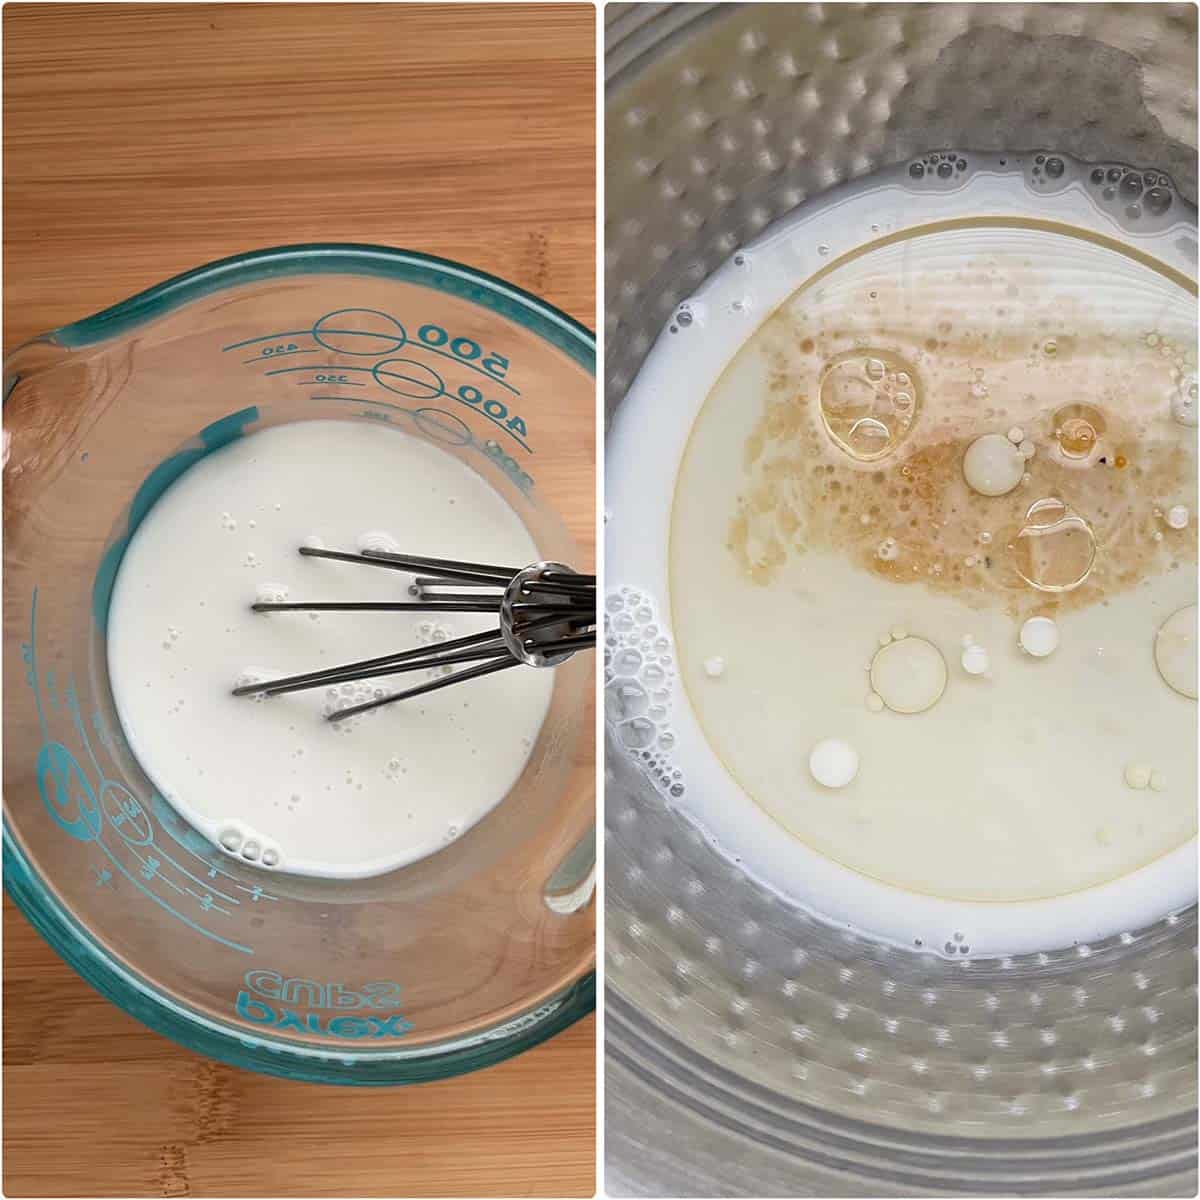 2 panel photo showing the mixing of wet ingredients.